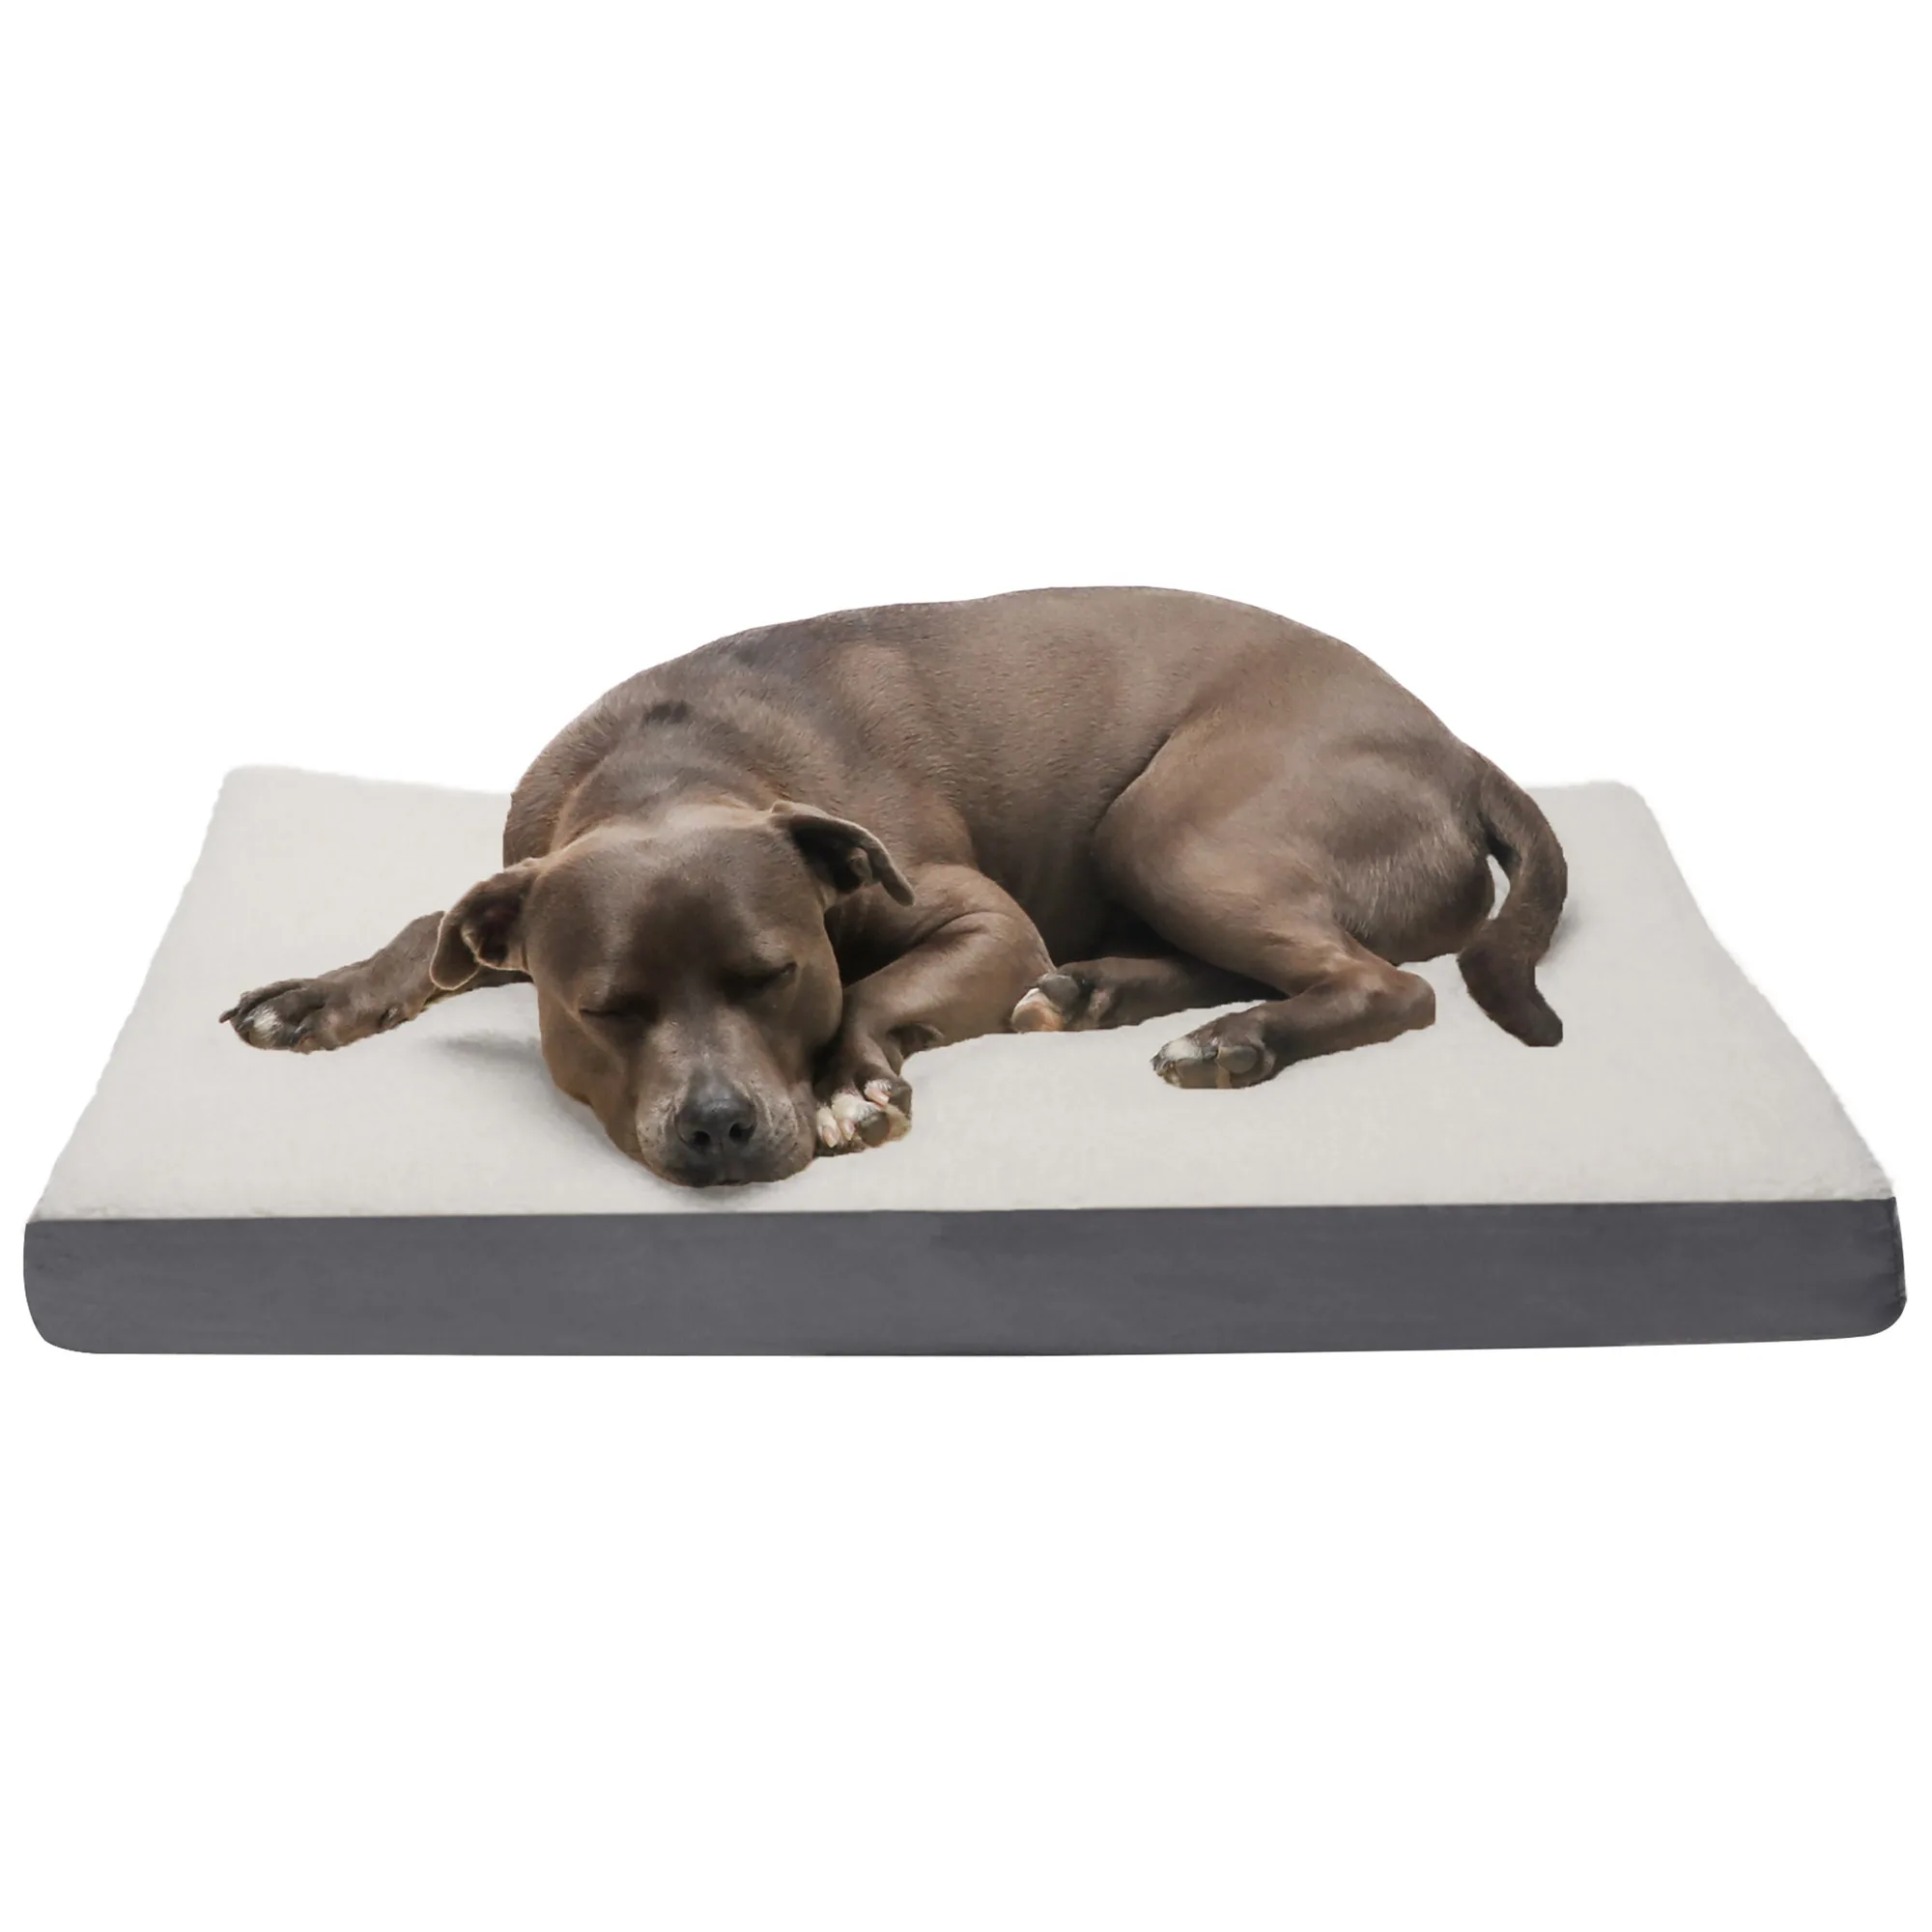 

HMTX Pet Dog Bed | Deluxe Cooling Gel Memory Foam Orthopedic Sherpa & Suede Pet Bed Mattress for Dogs & Cats, Gray, Large